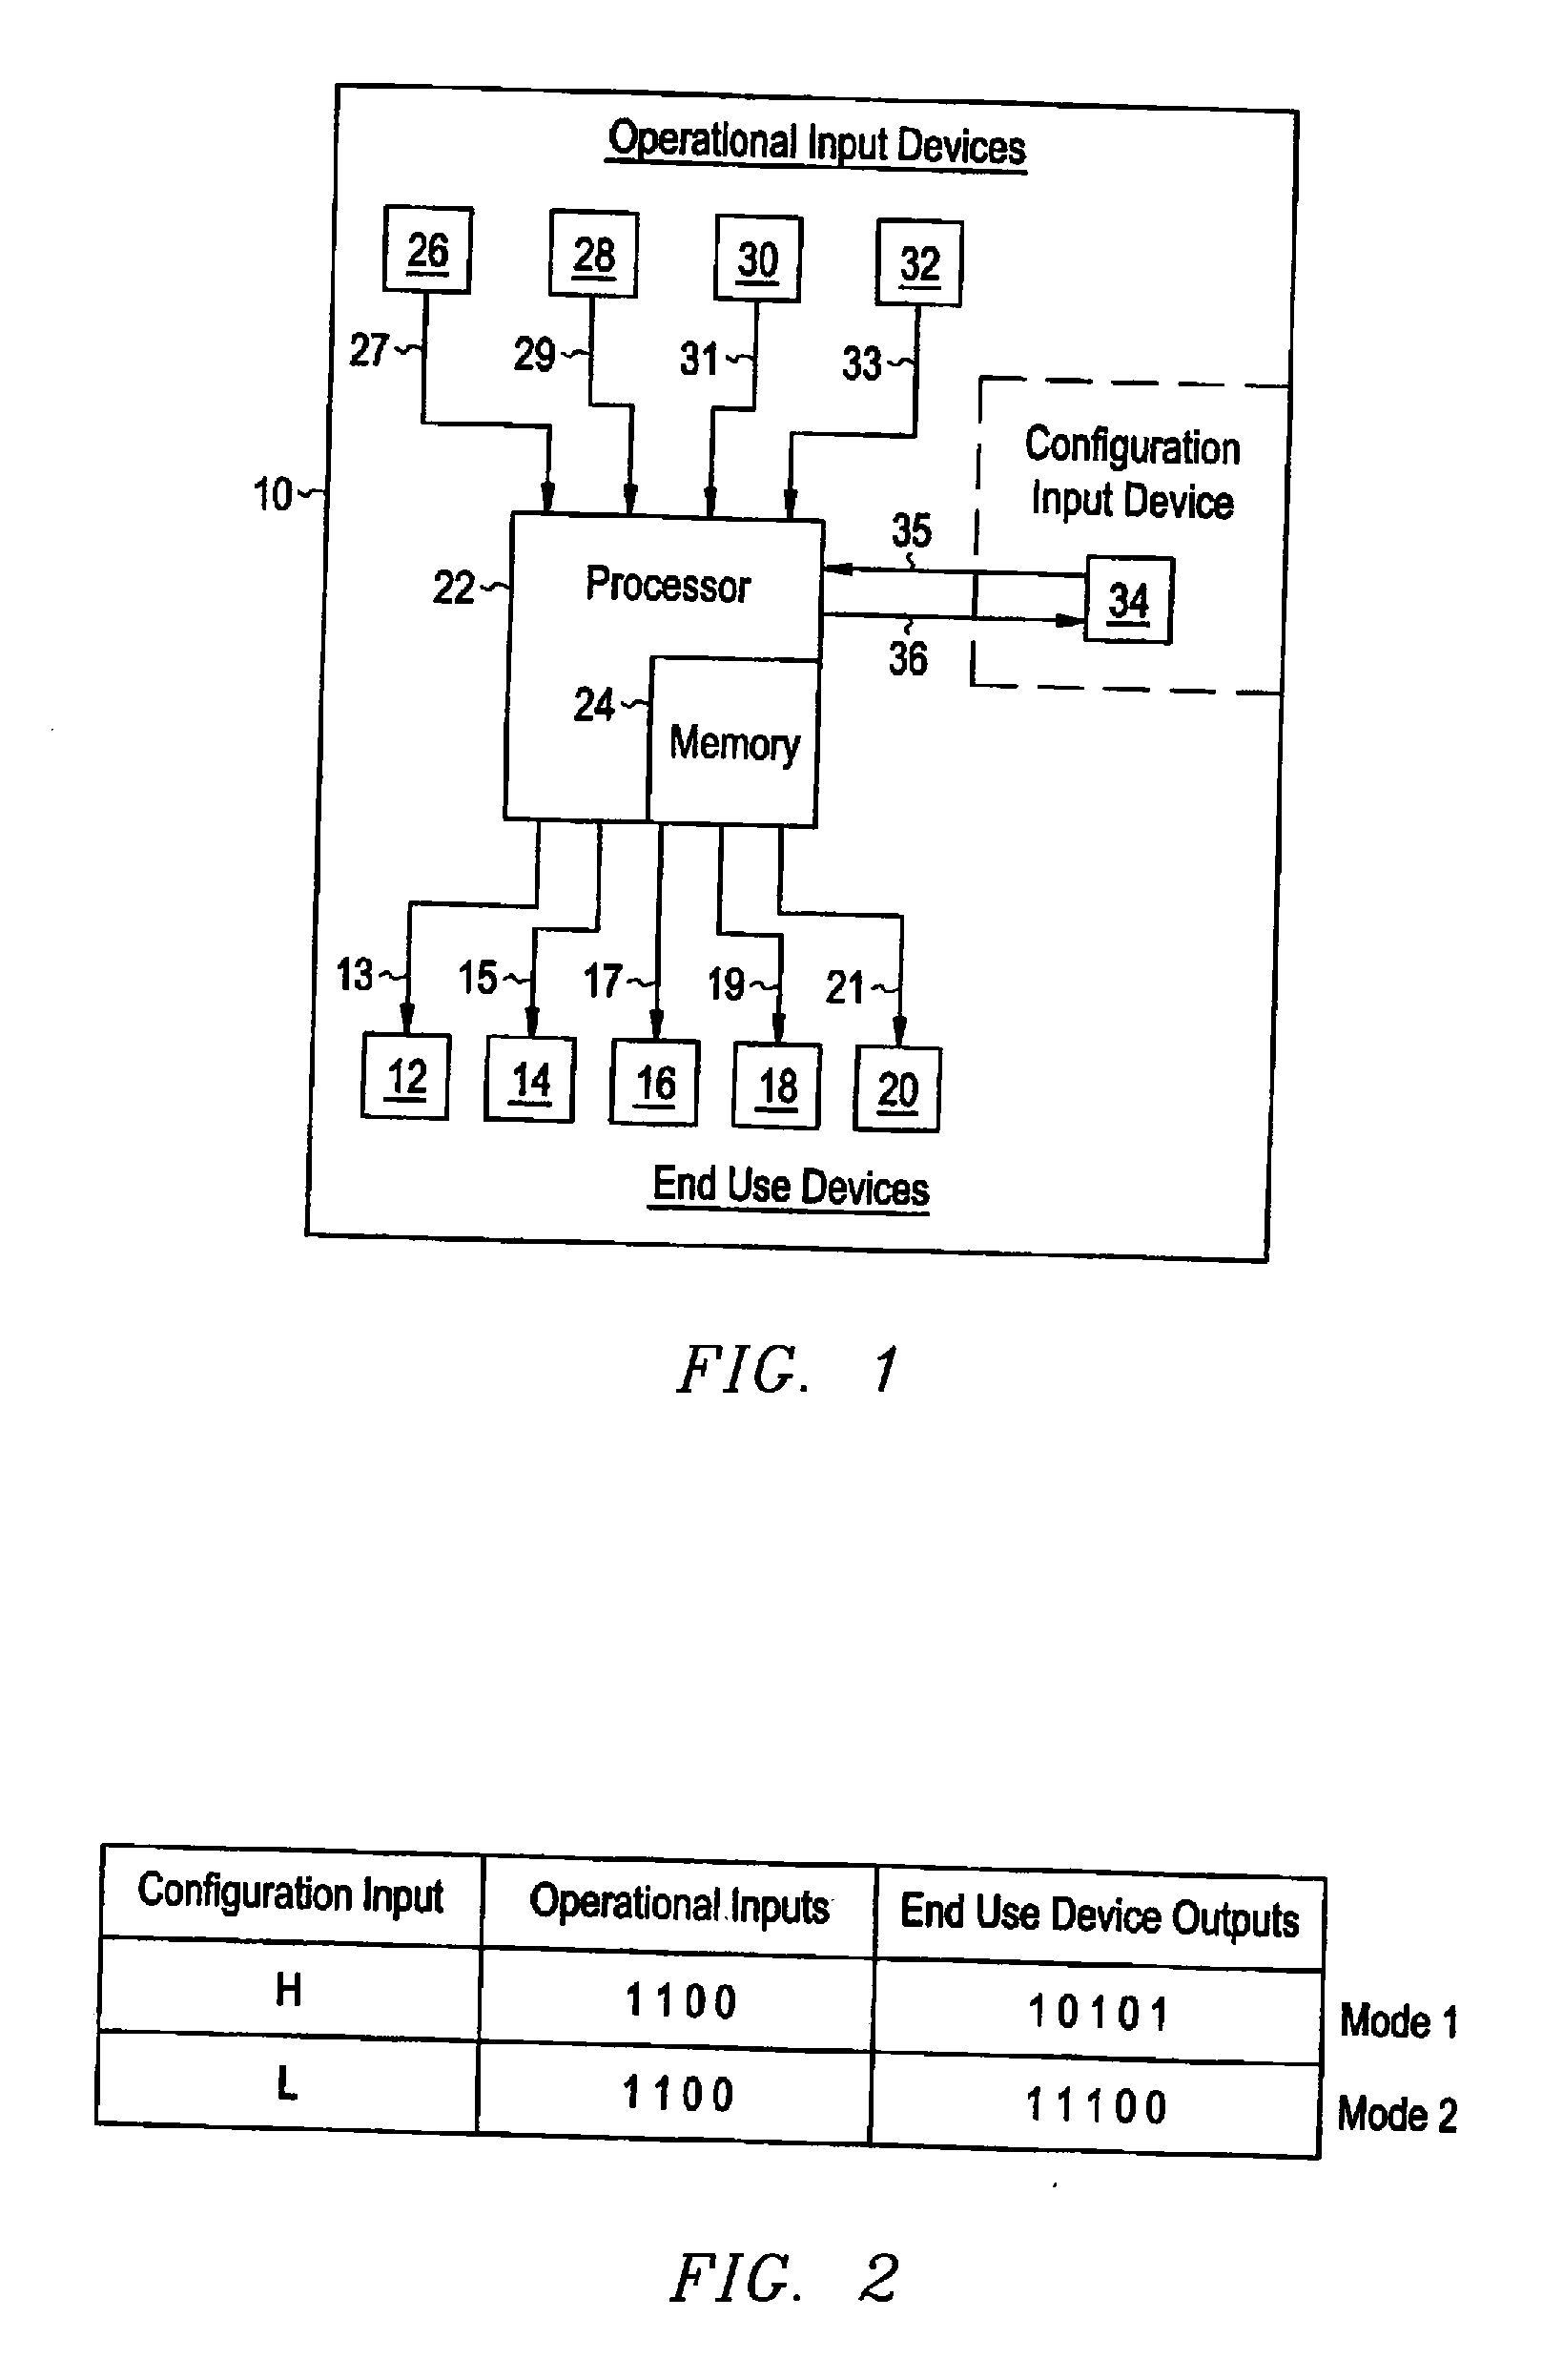 System and Method for Managing Emissions from Diesel Powered Systems